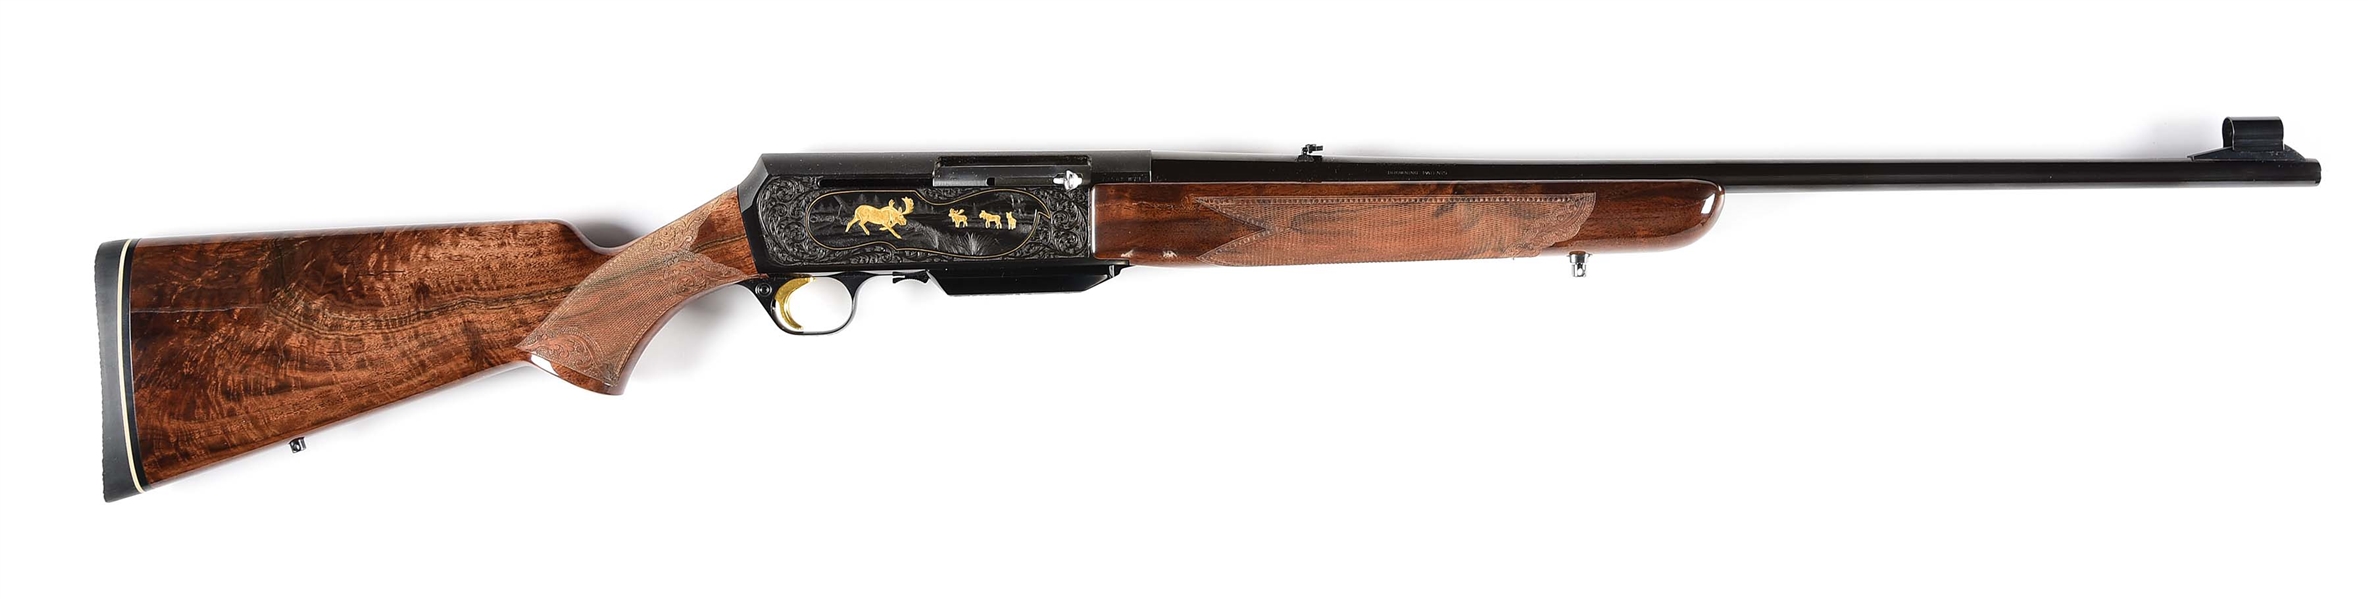 (M) BELGIAN BROWNING GRADE V BAR SEMI-AUTOMATIC RIFLE (7MM REM. MAG.) WITH FINE SCROLL AND INLAID GAME SCENES BY KOWALSKI.